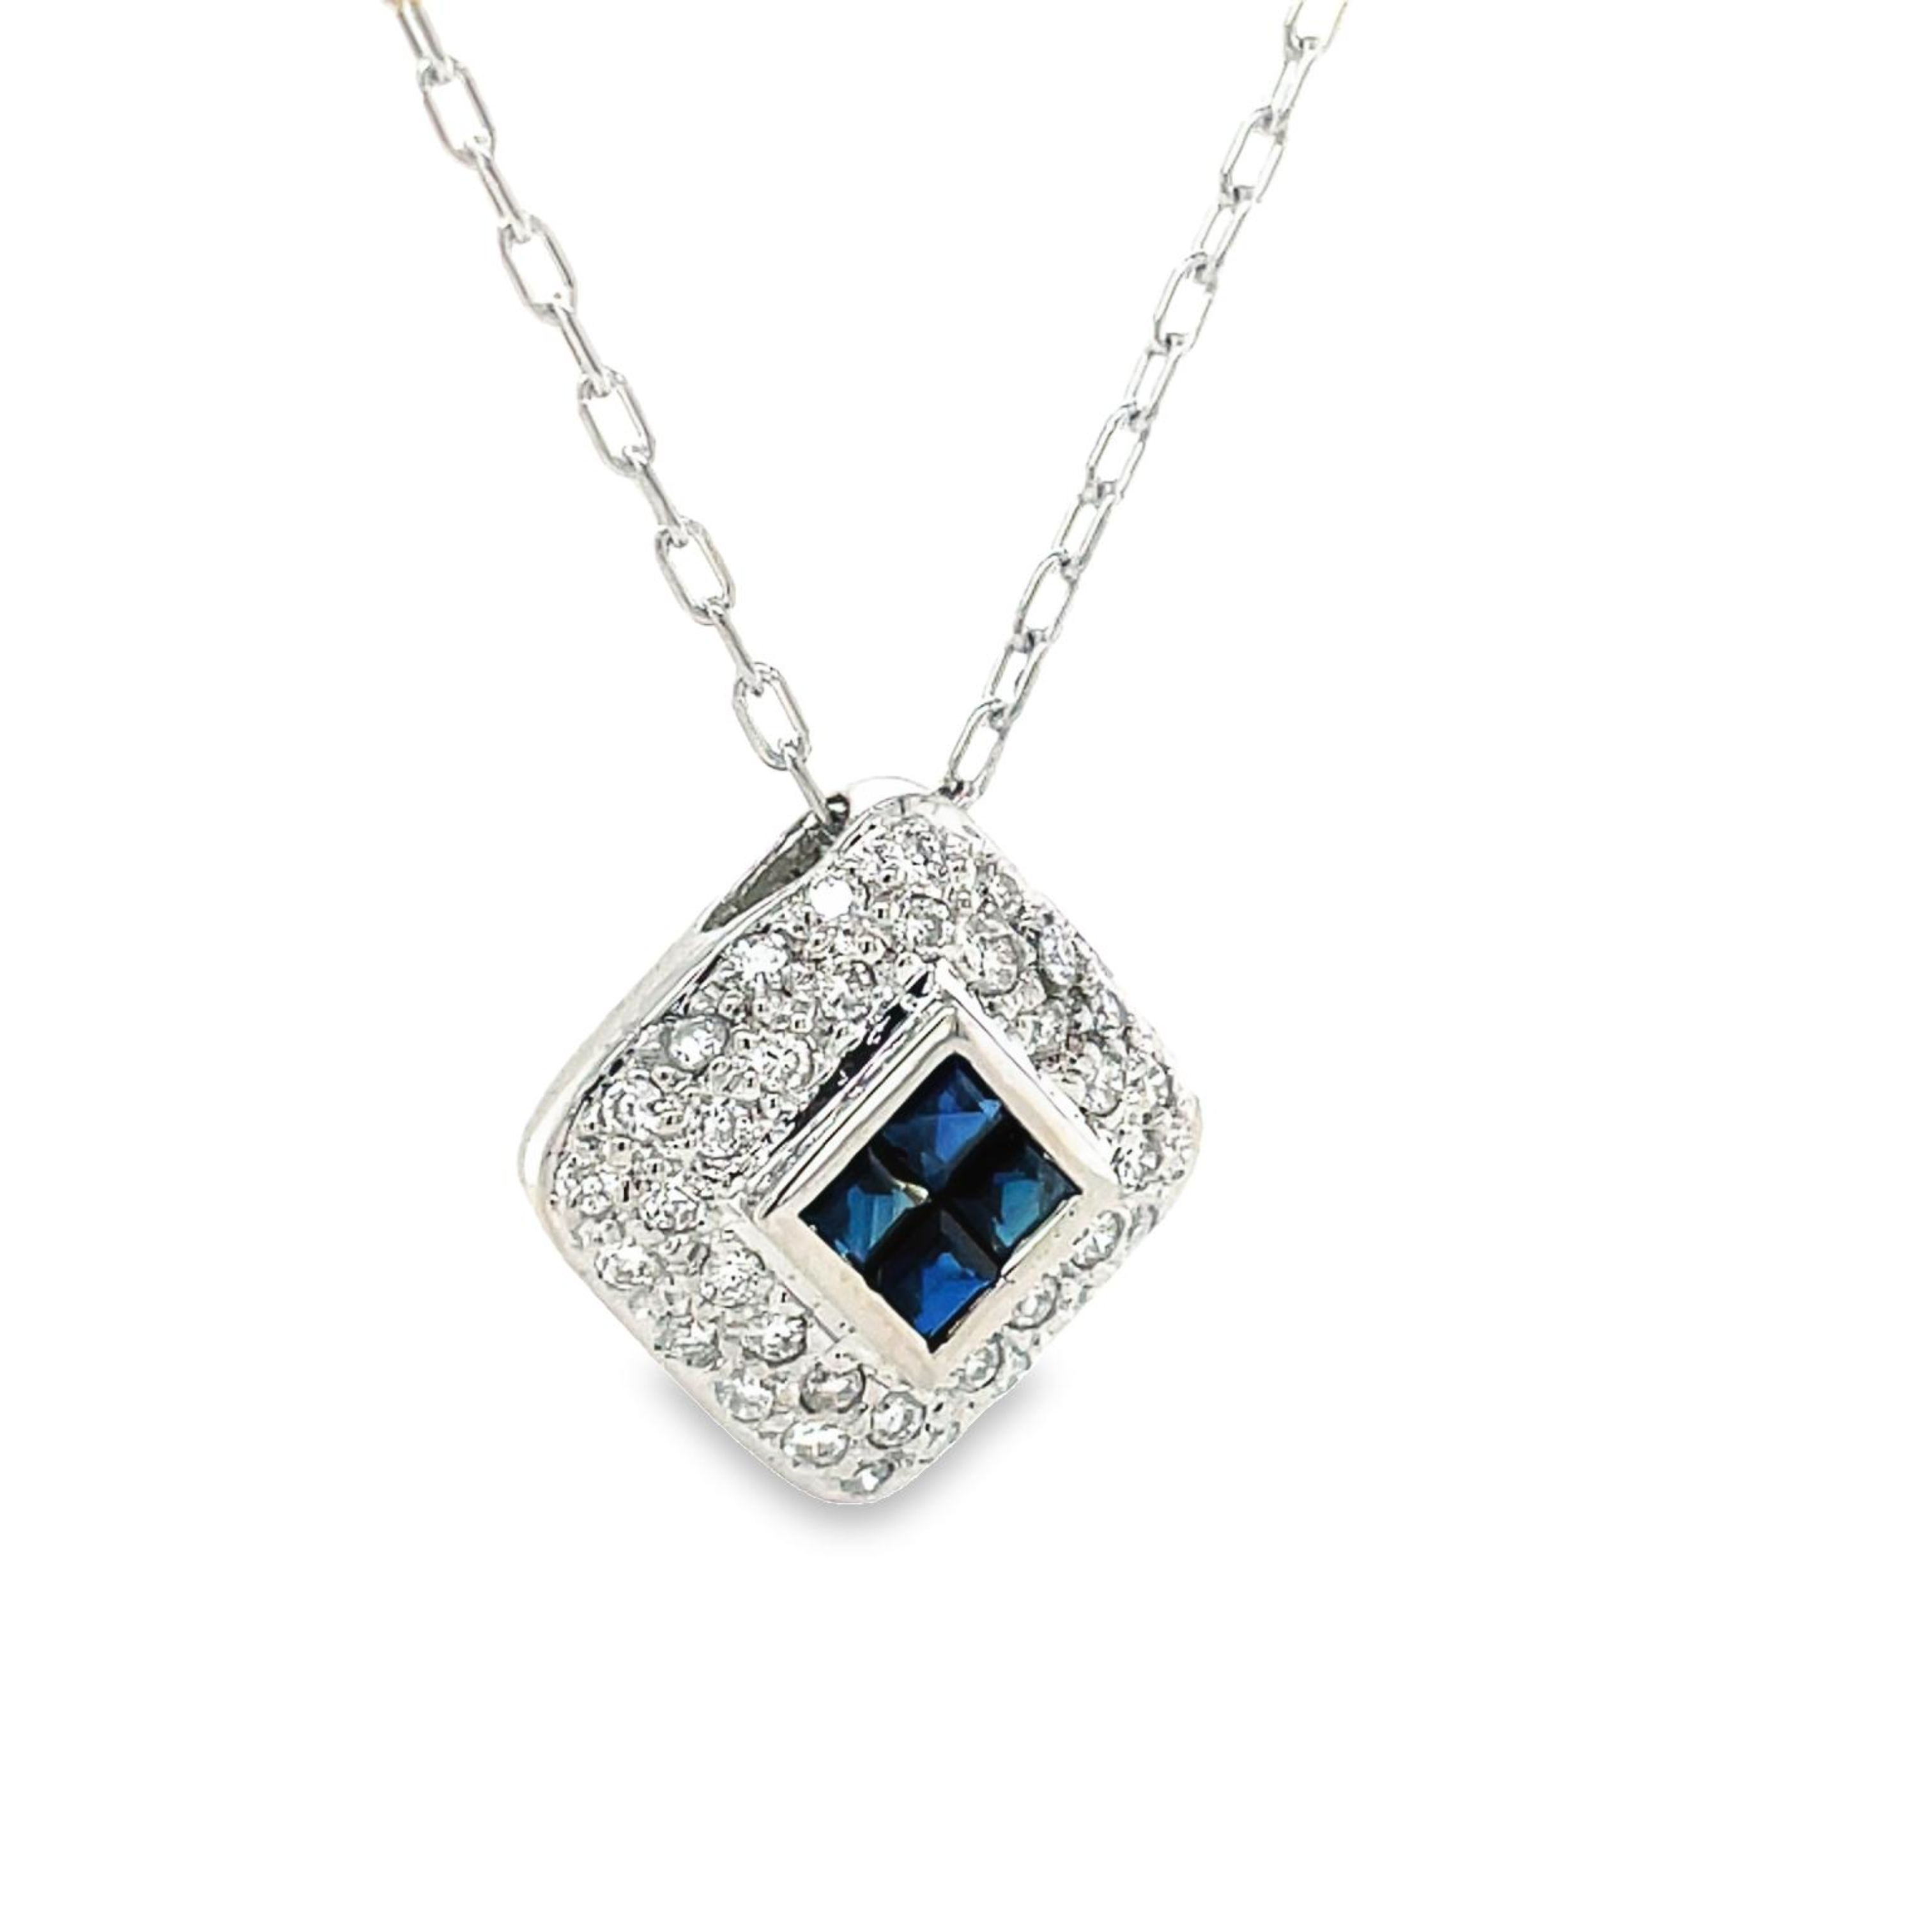 This stunning 14k white gold pendant necklace features 0.20 cts of round diamonds in E/F color and 0.70 cts of princess cut sapphires. Create elegant looks with the modern design of this tilted pendant necklace.